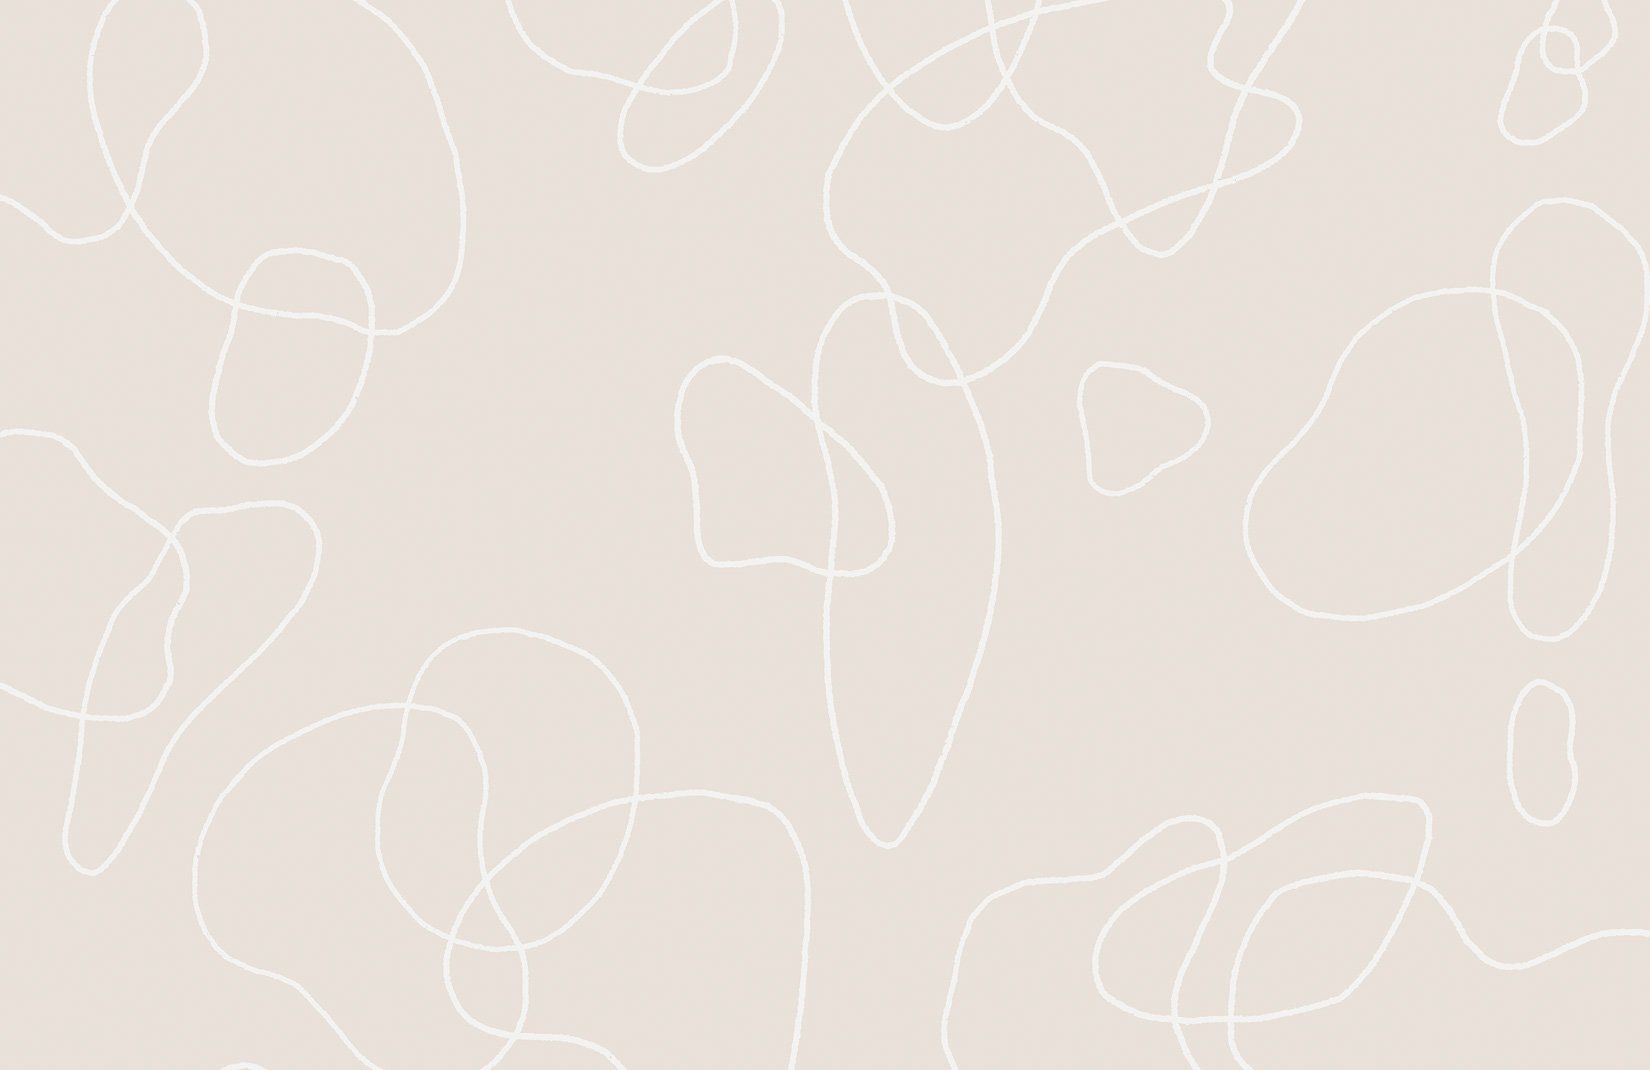 A beige background with white squiggly lines on it - Doodles